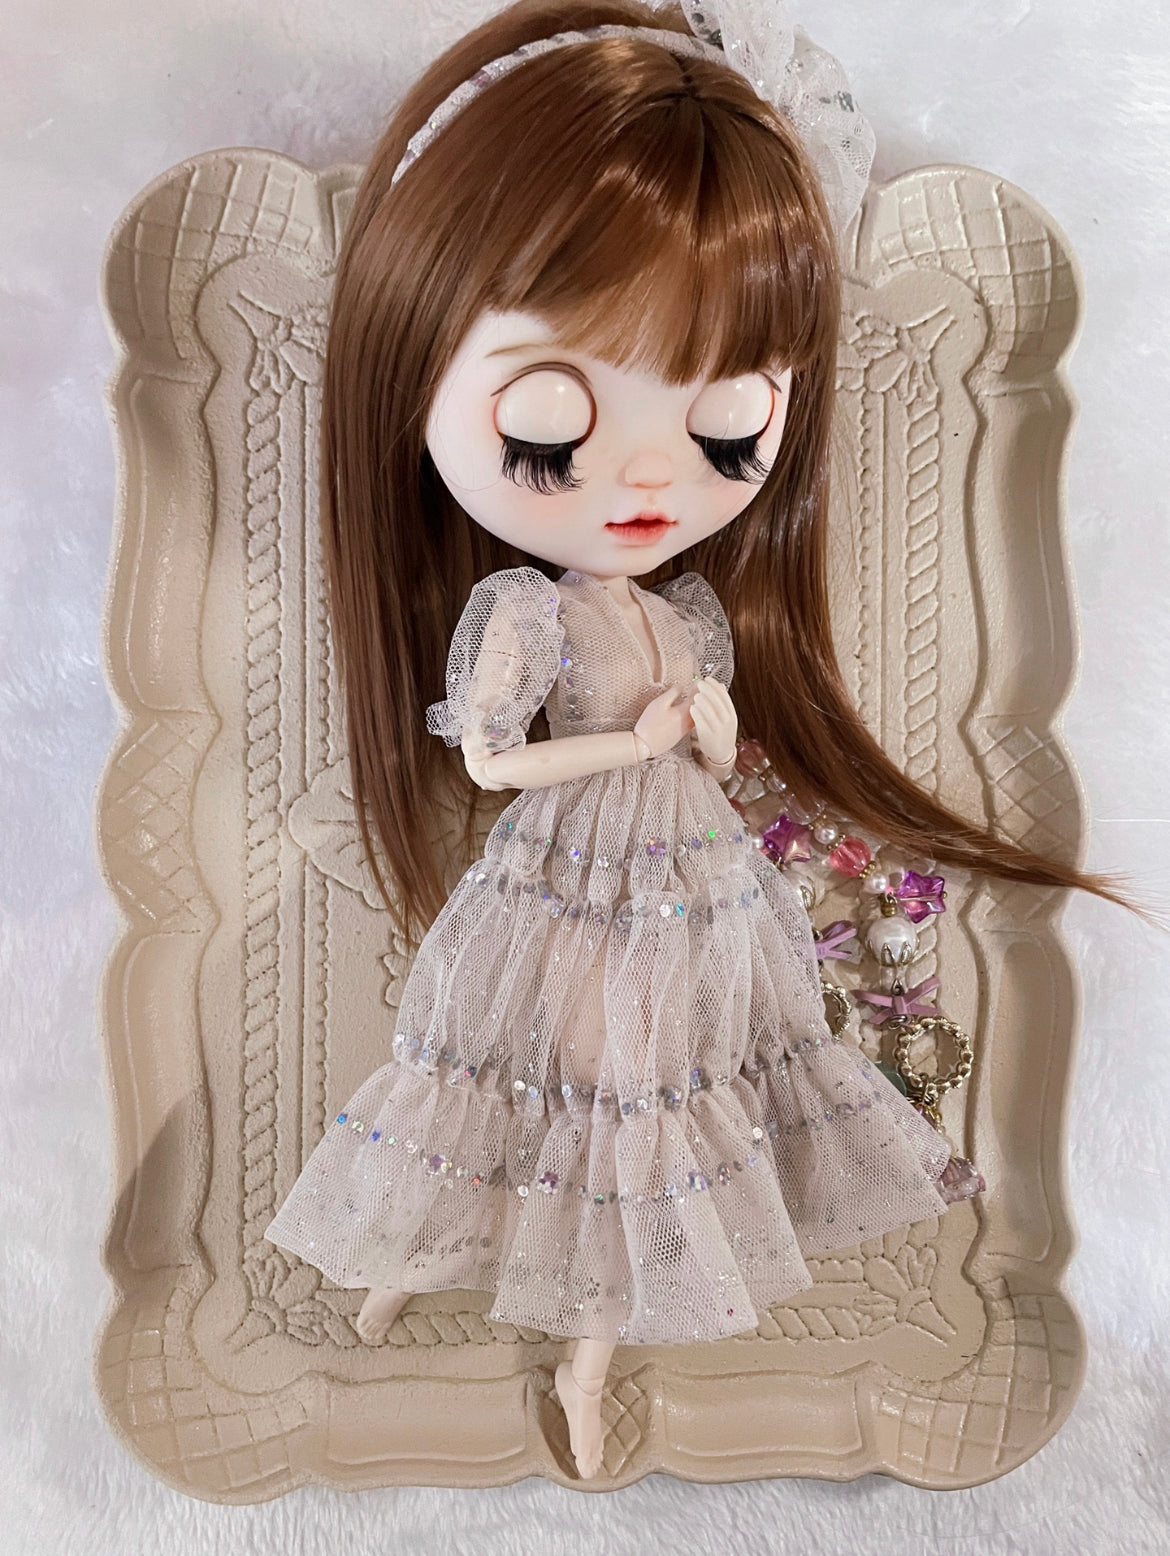 White Long Dress Night Dress for Blythe,BJD 1/6 Doll Clothes Customized 09